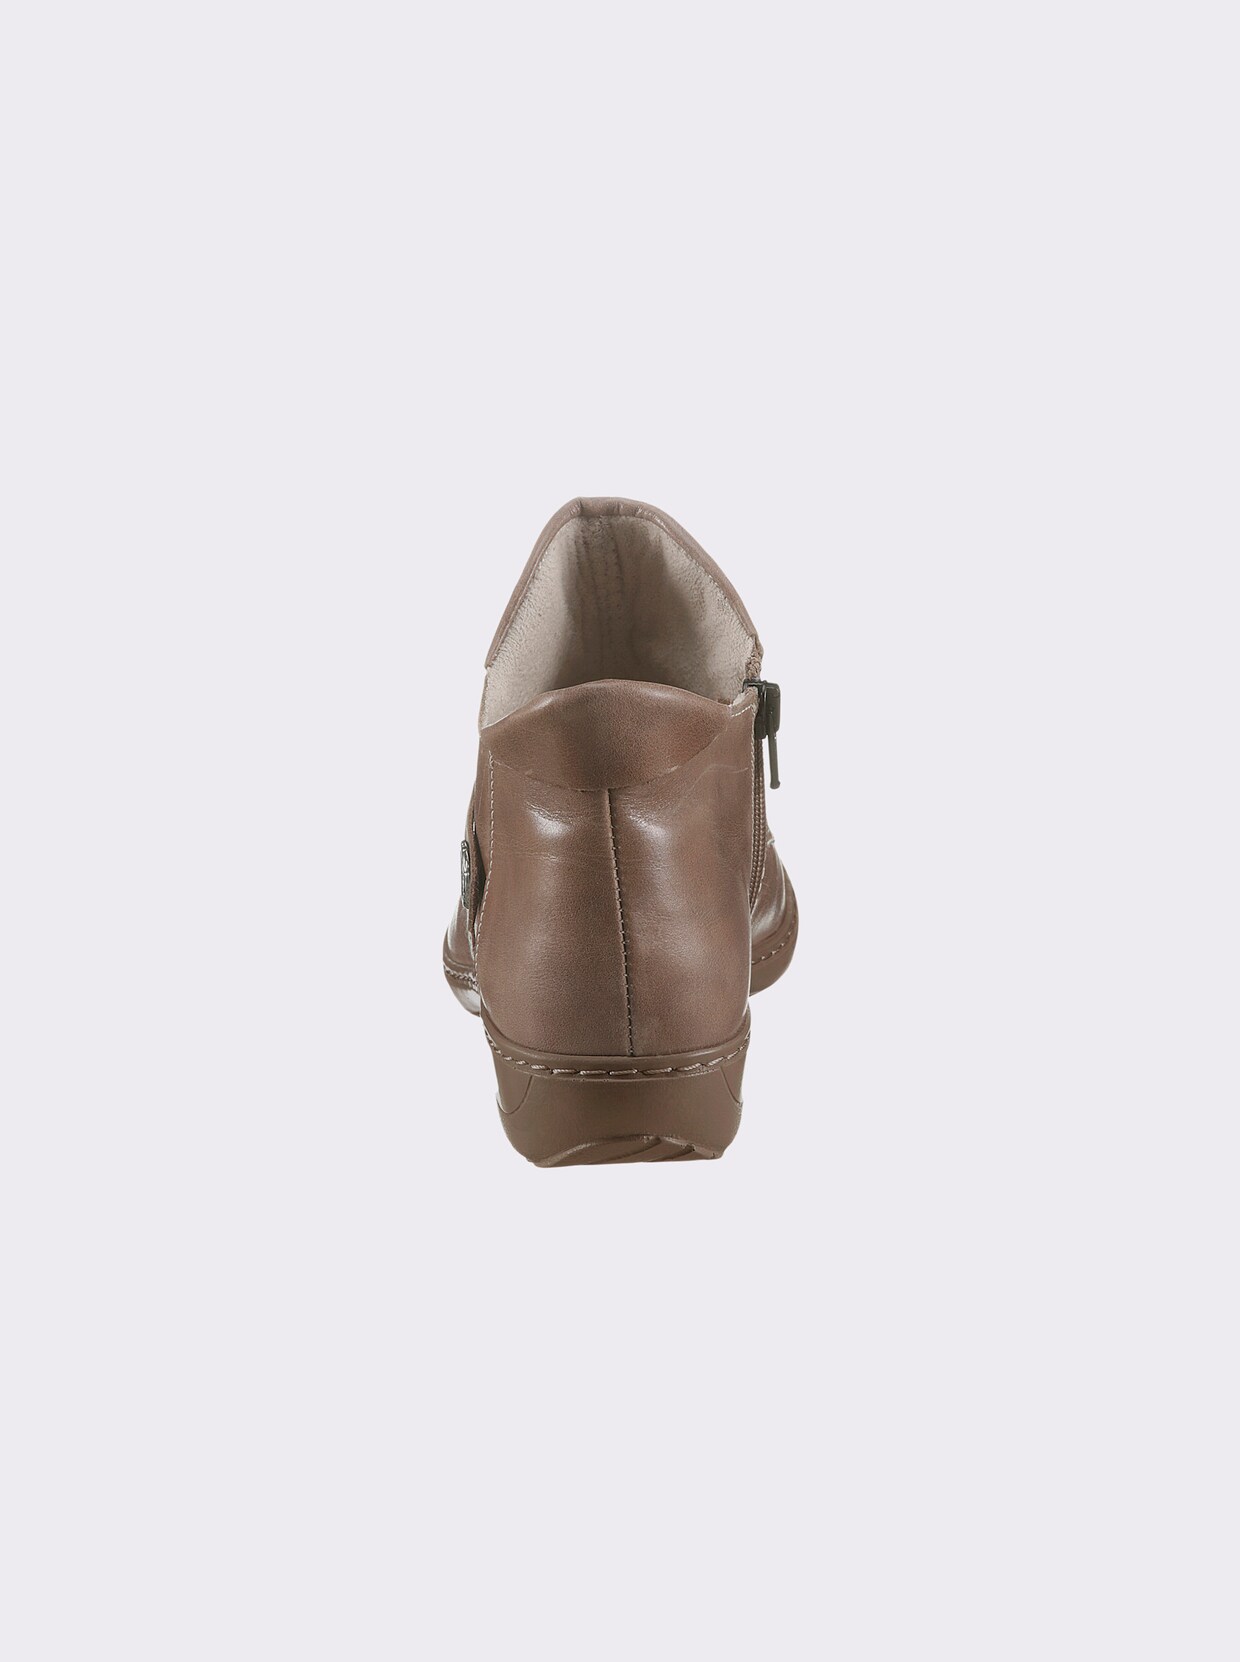 Airsoft Stiefelette - taupe